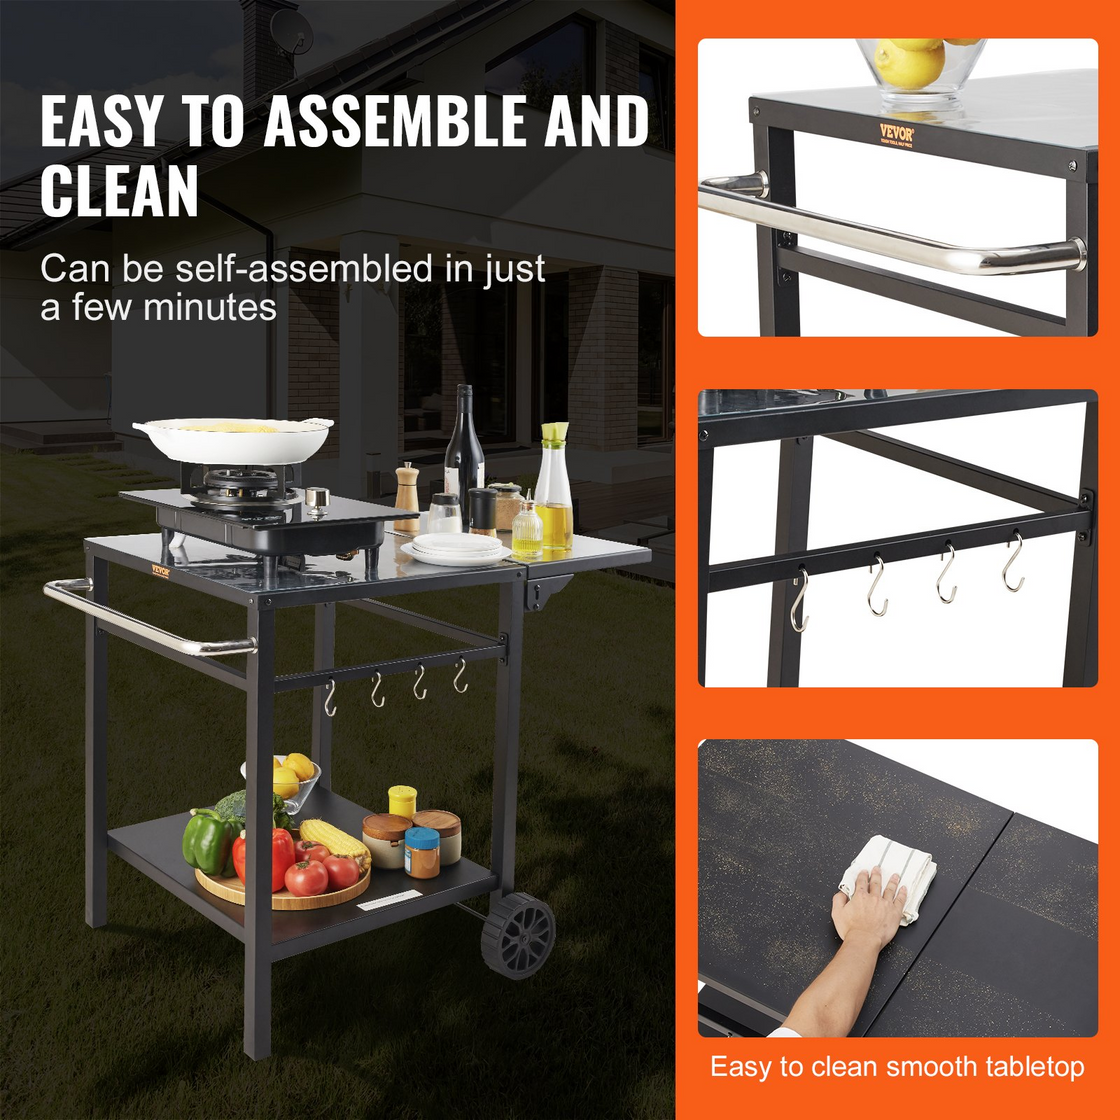 VEVOR Outdoor Grill Dining Cart with Double-Shelf | BBQ Movable Food Prep Table